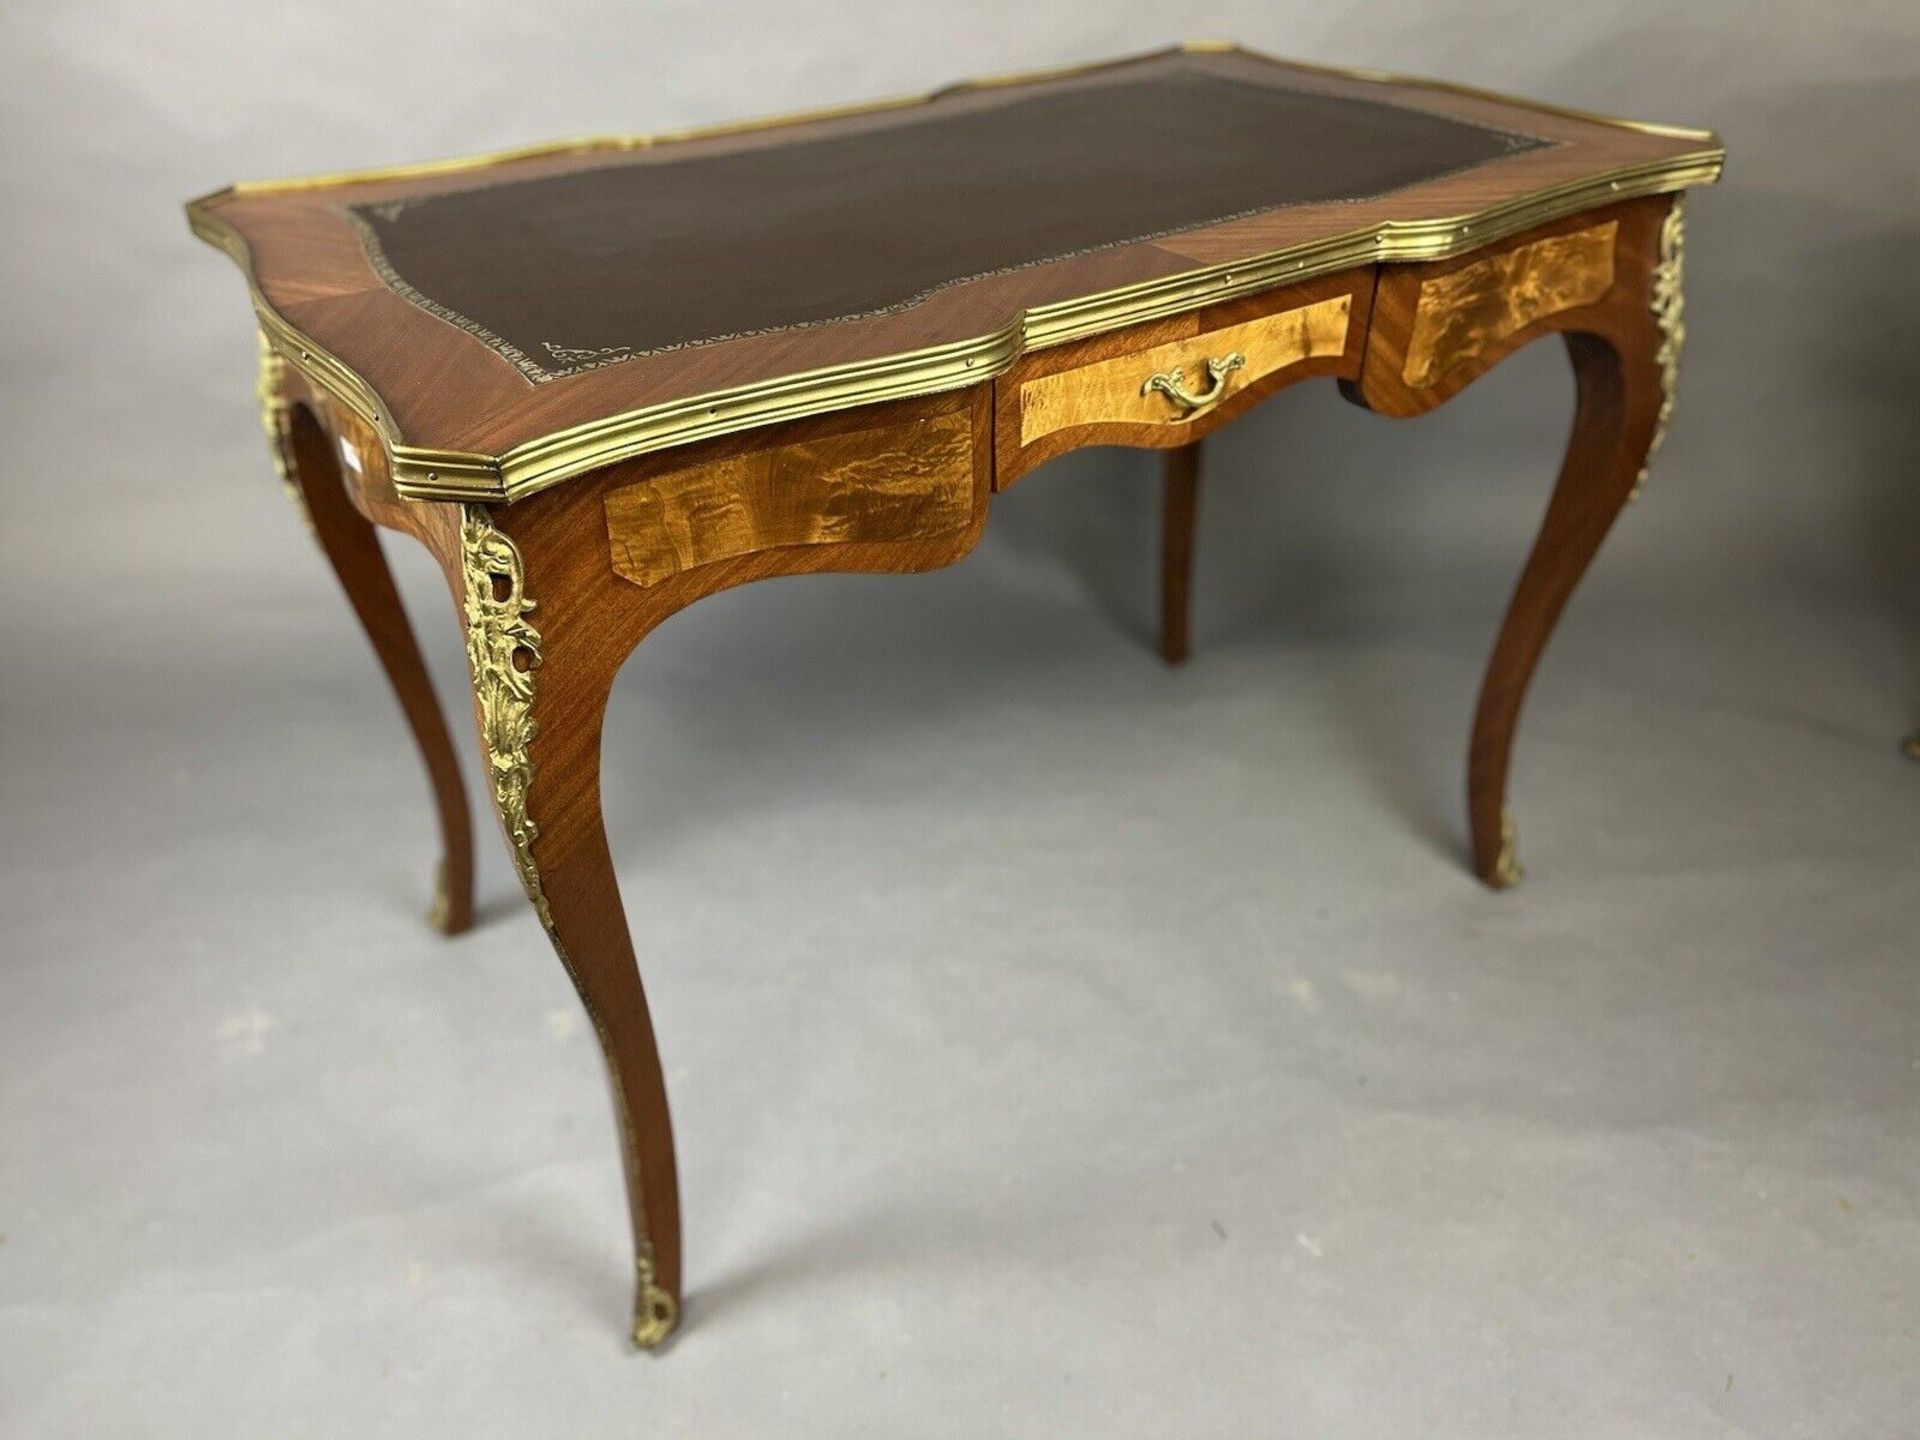 French Louis XV Style Kingwood Leather Inlay Bureau Plat Desk With Gilt Bronze Ormolu The Shaped Top - Image 7 of 7